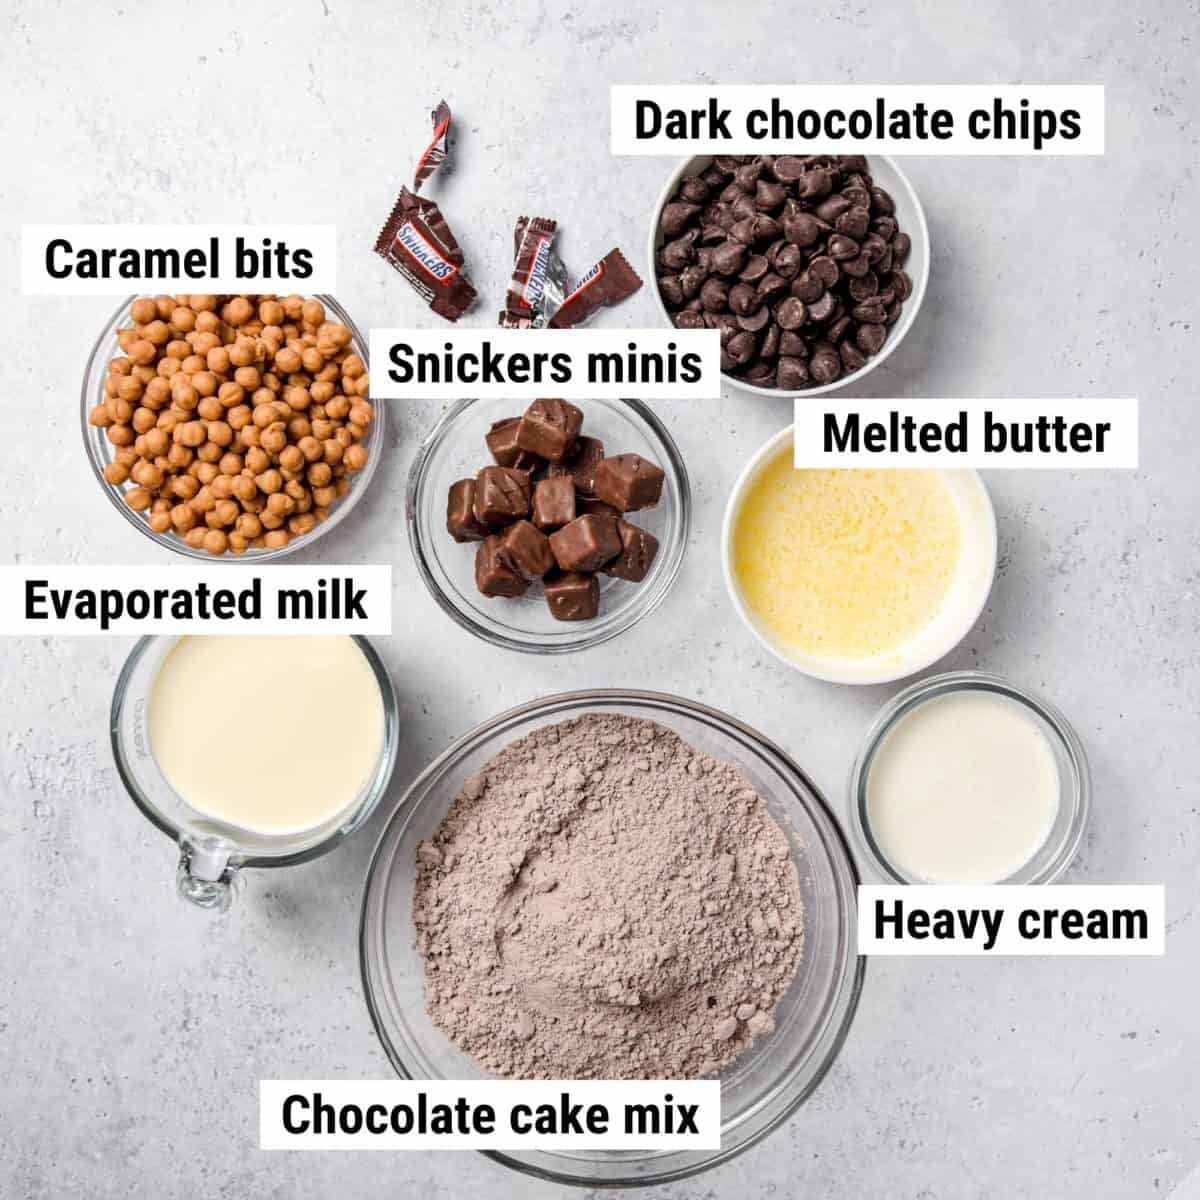 The ingredients used to make Snickers brownies laid out on a table.